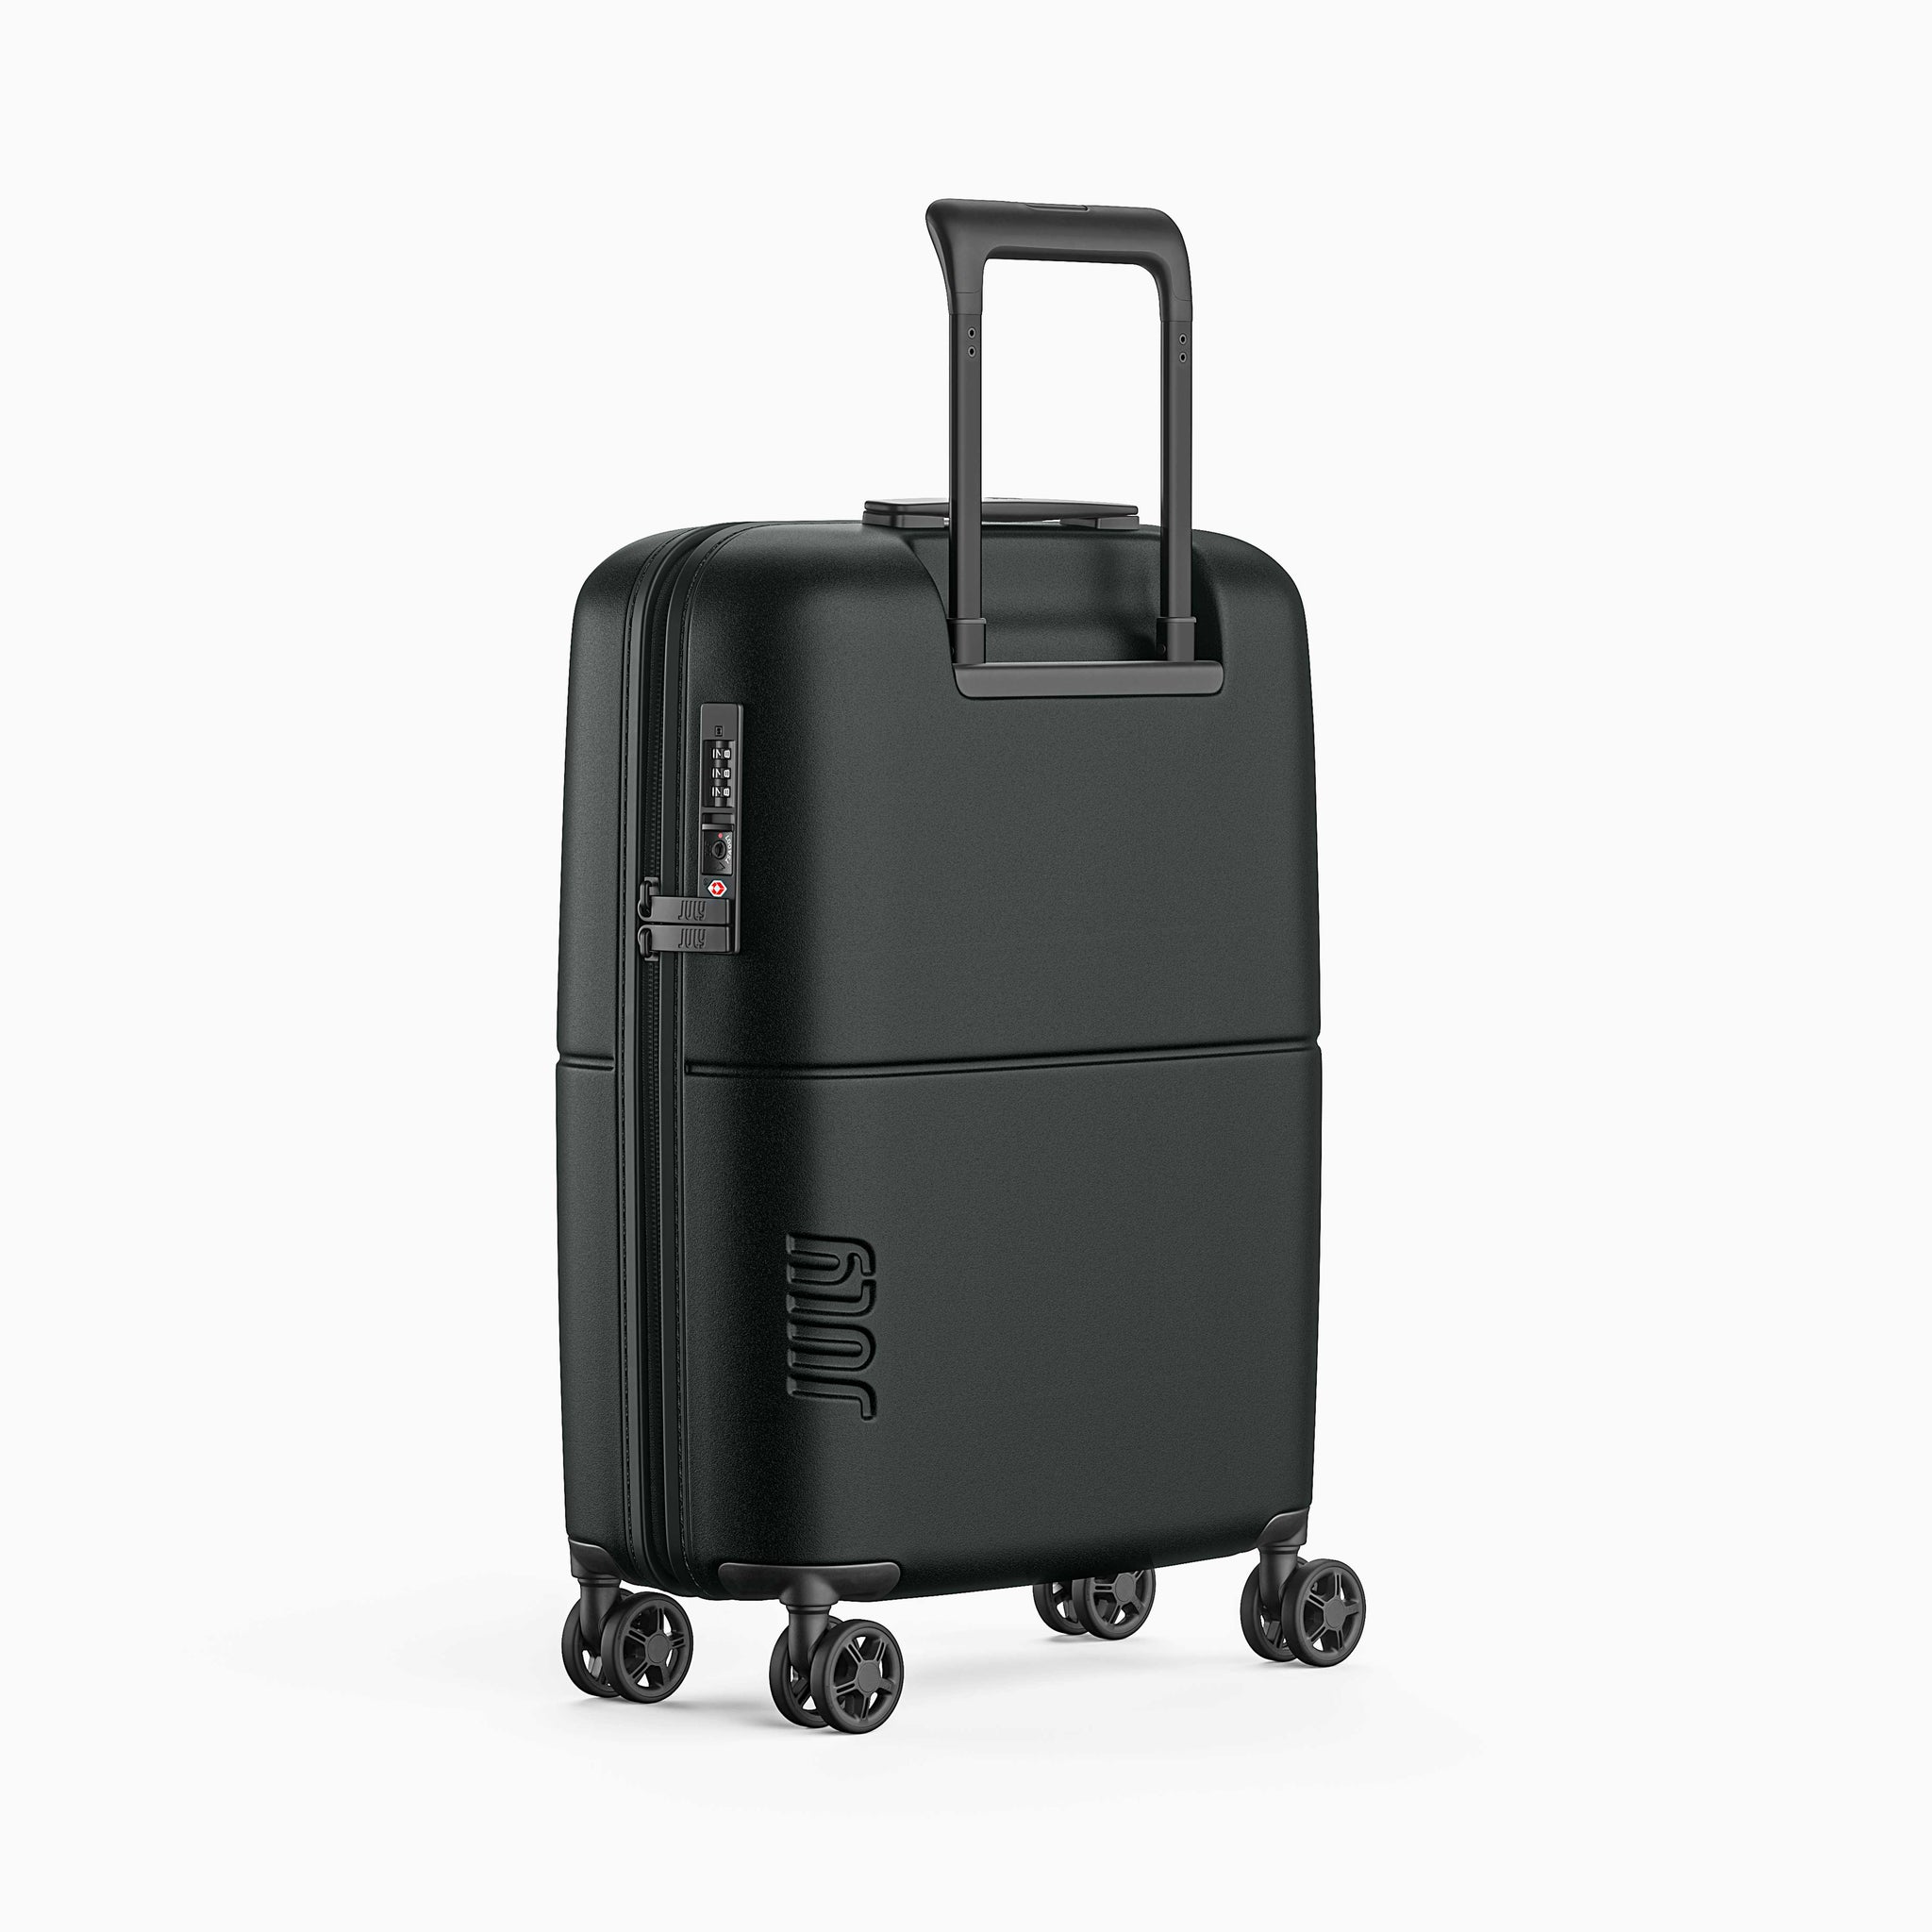 The July Carry On, A Sleek And Minimal Luggage – Rushfaster Australia